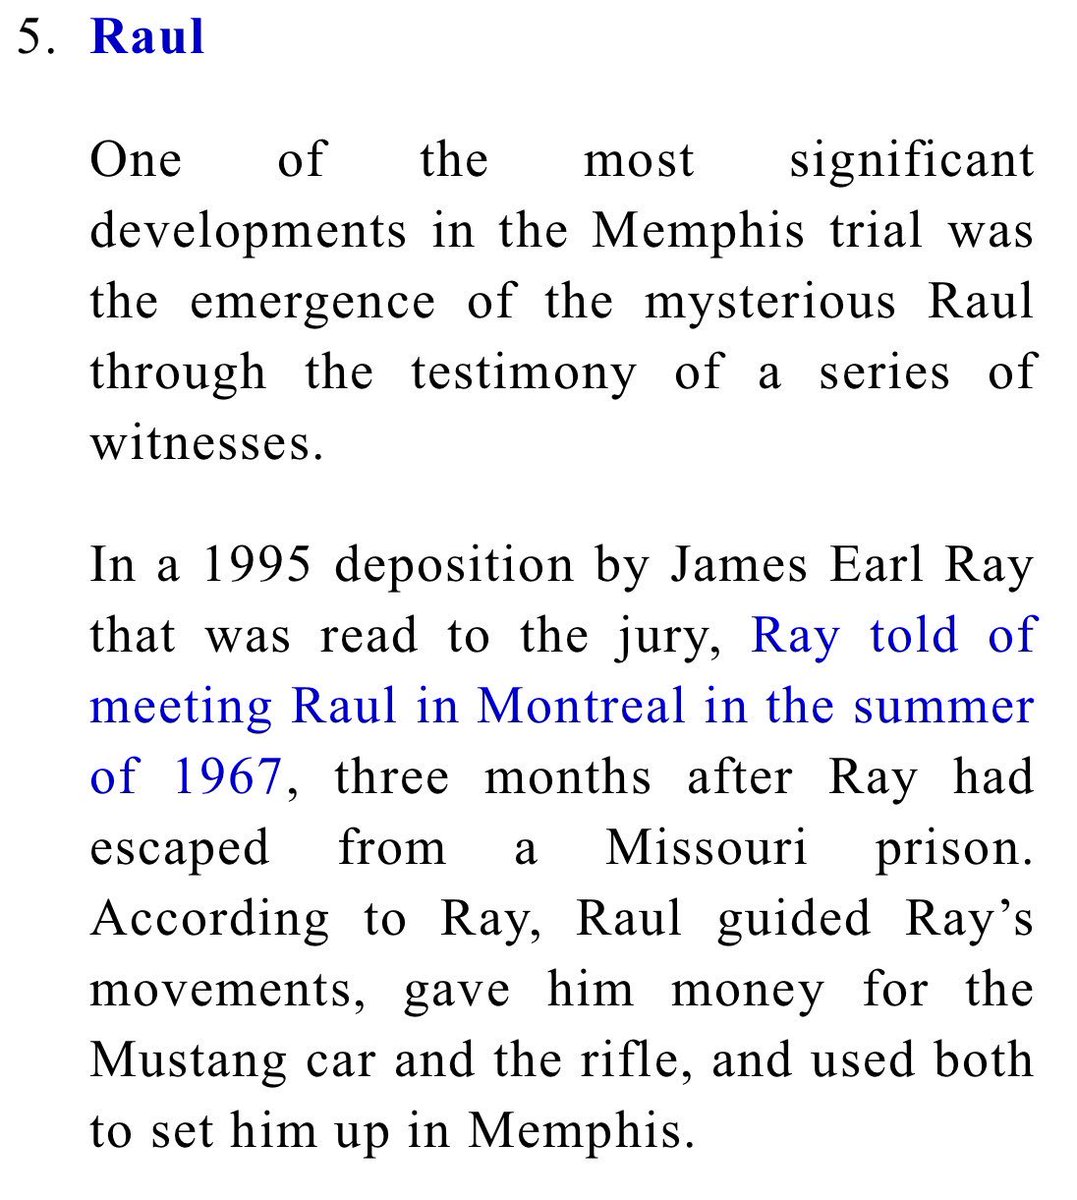 Loyd Jowers Also Confessed That The Gun Runner Who Brought Him The Murder Weapon Name Was Rual A Mysterious Hispanic Looking Man And Government Agent Who Met & Framed James Earl Ray Summer Of 1967 While On The Run In Canada A Few Months Before  #DrKing Was Assassinated  #MLKDay  